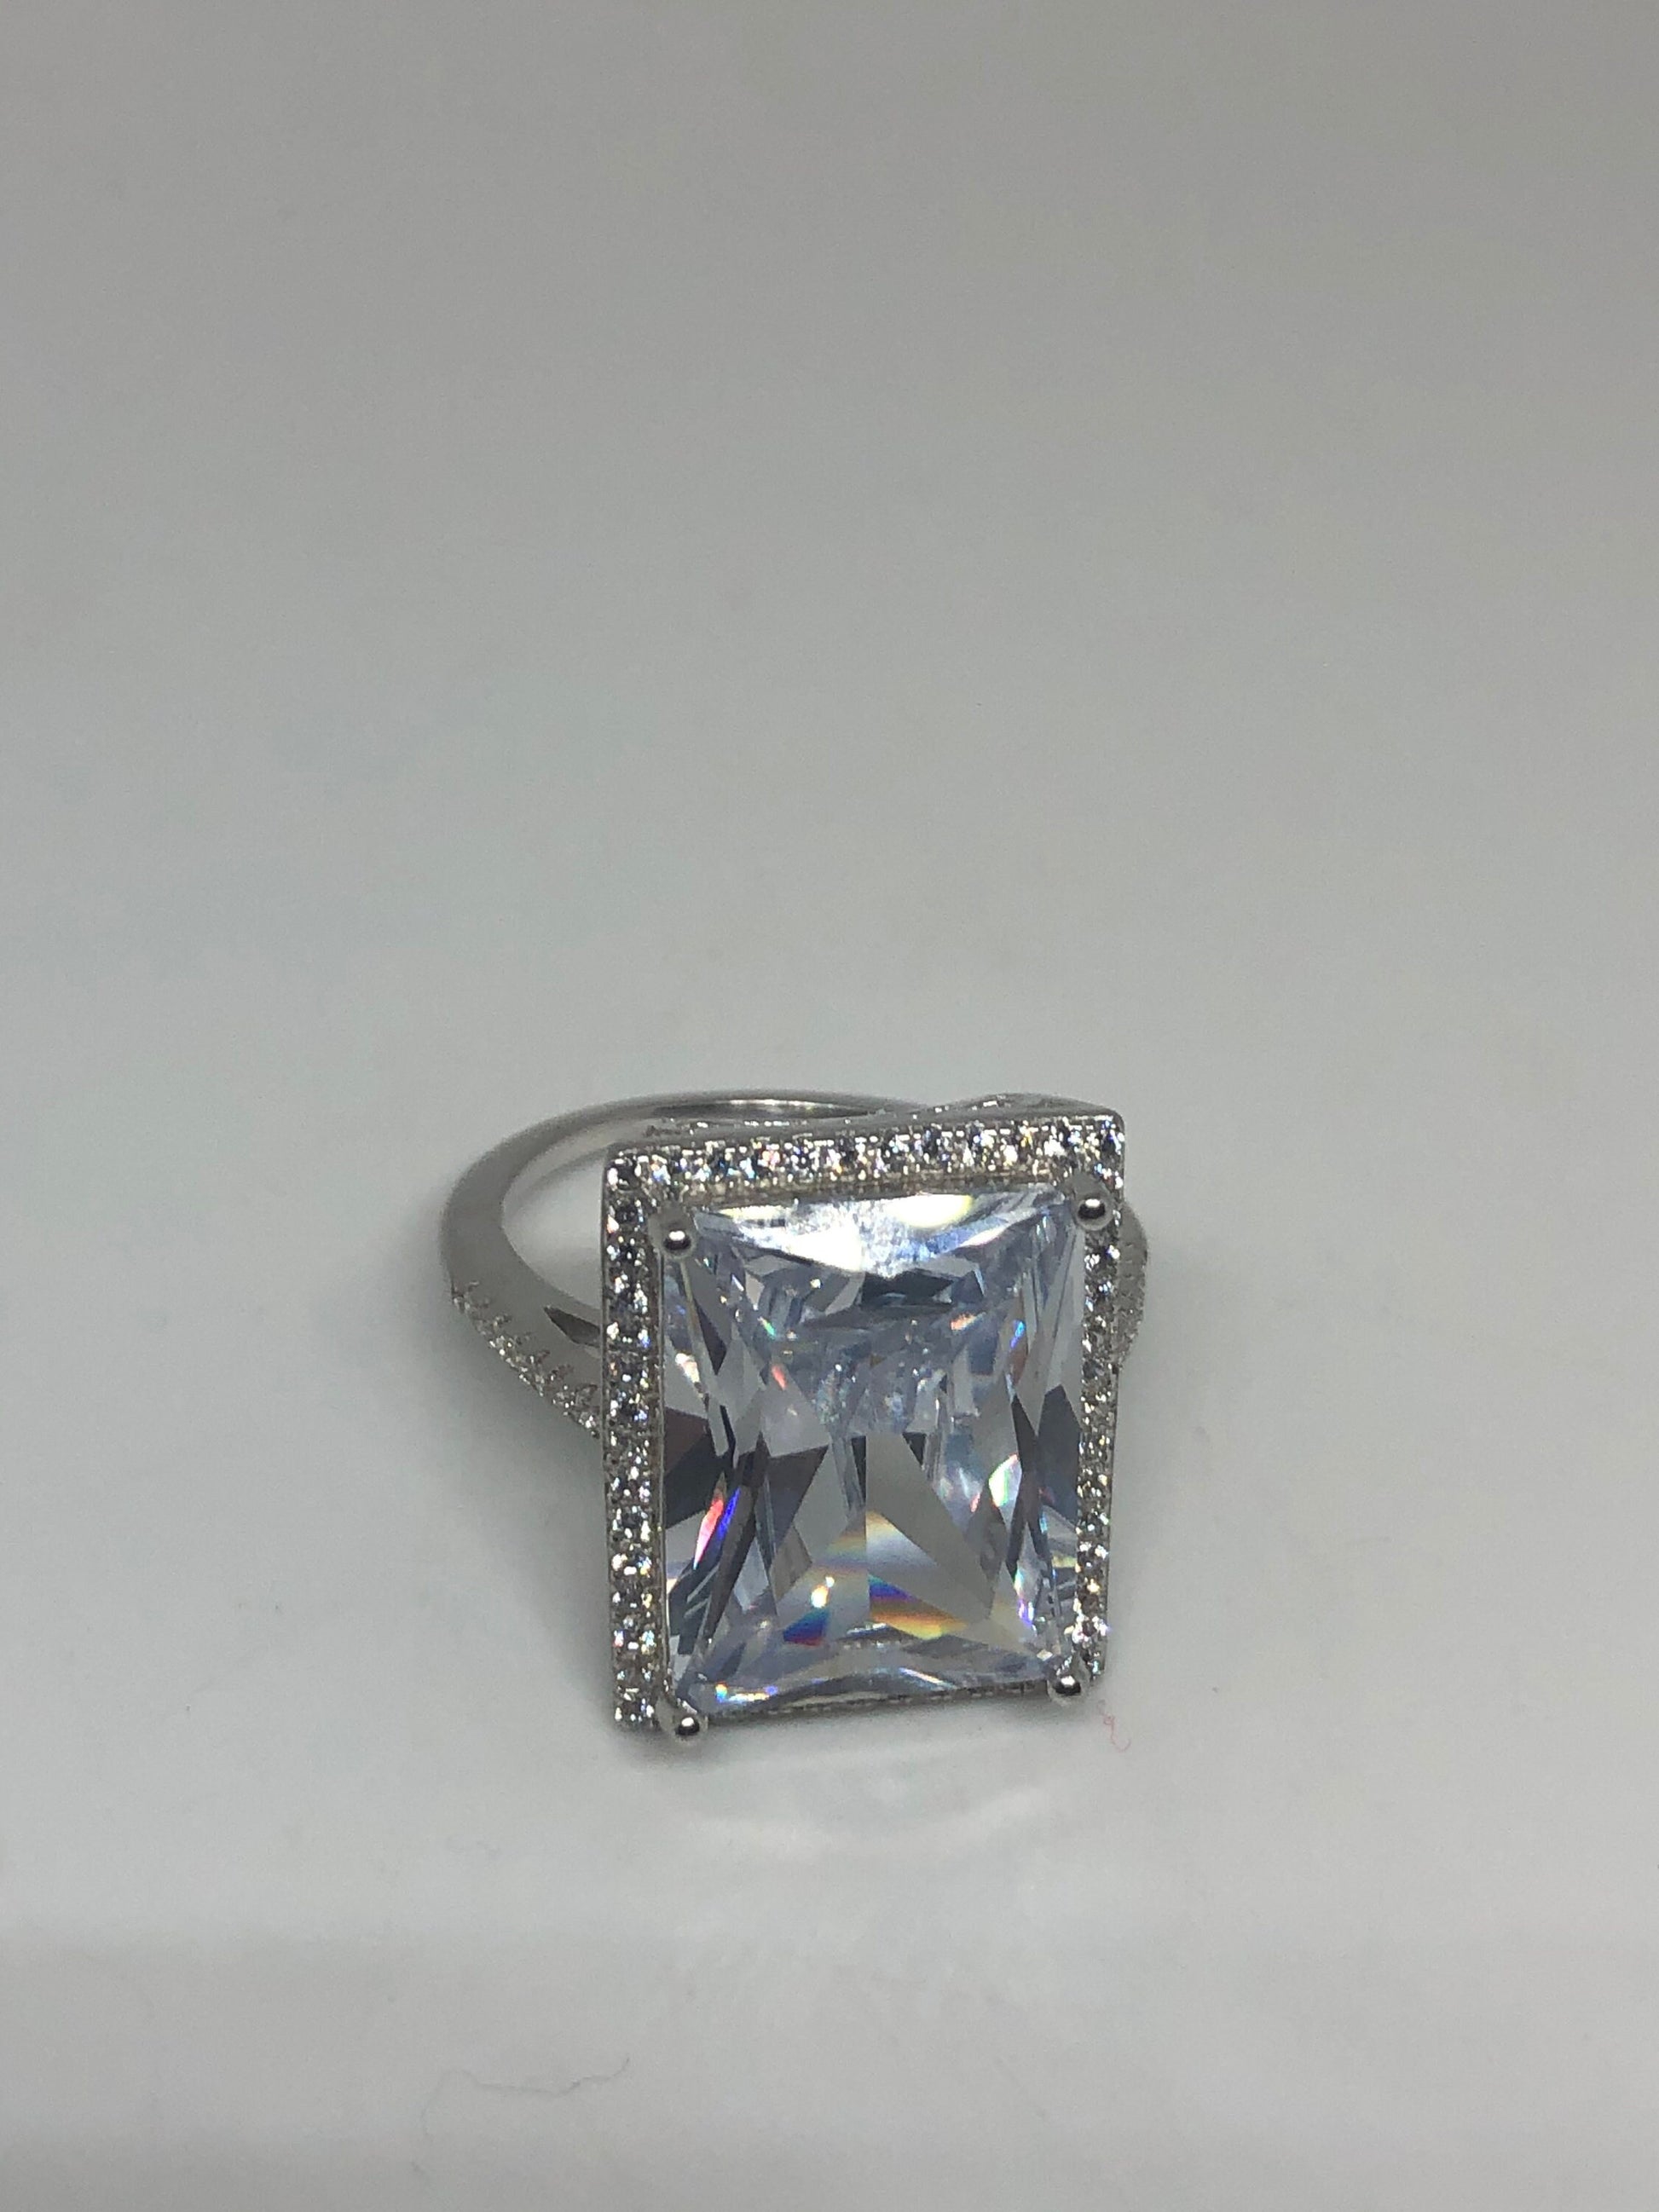 Vintage Cubic Zirconia Crystal Sterling Silver Ring Size 8